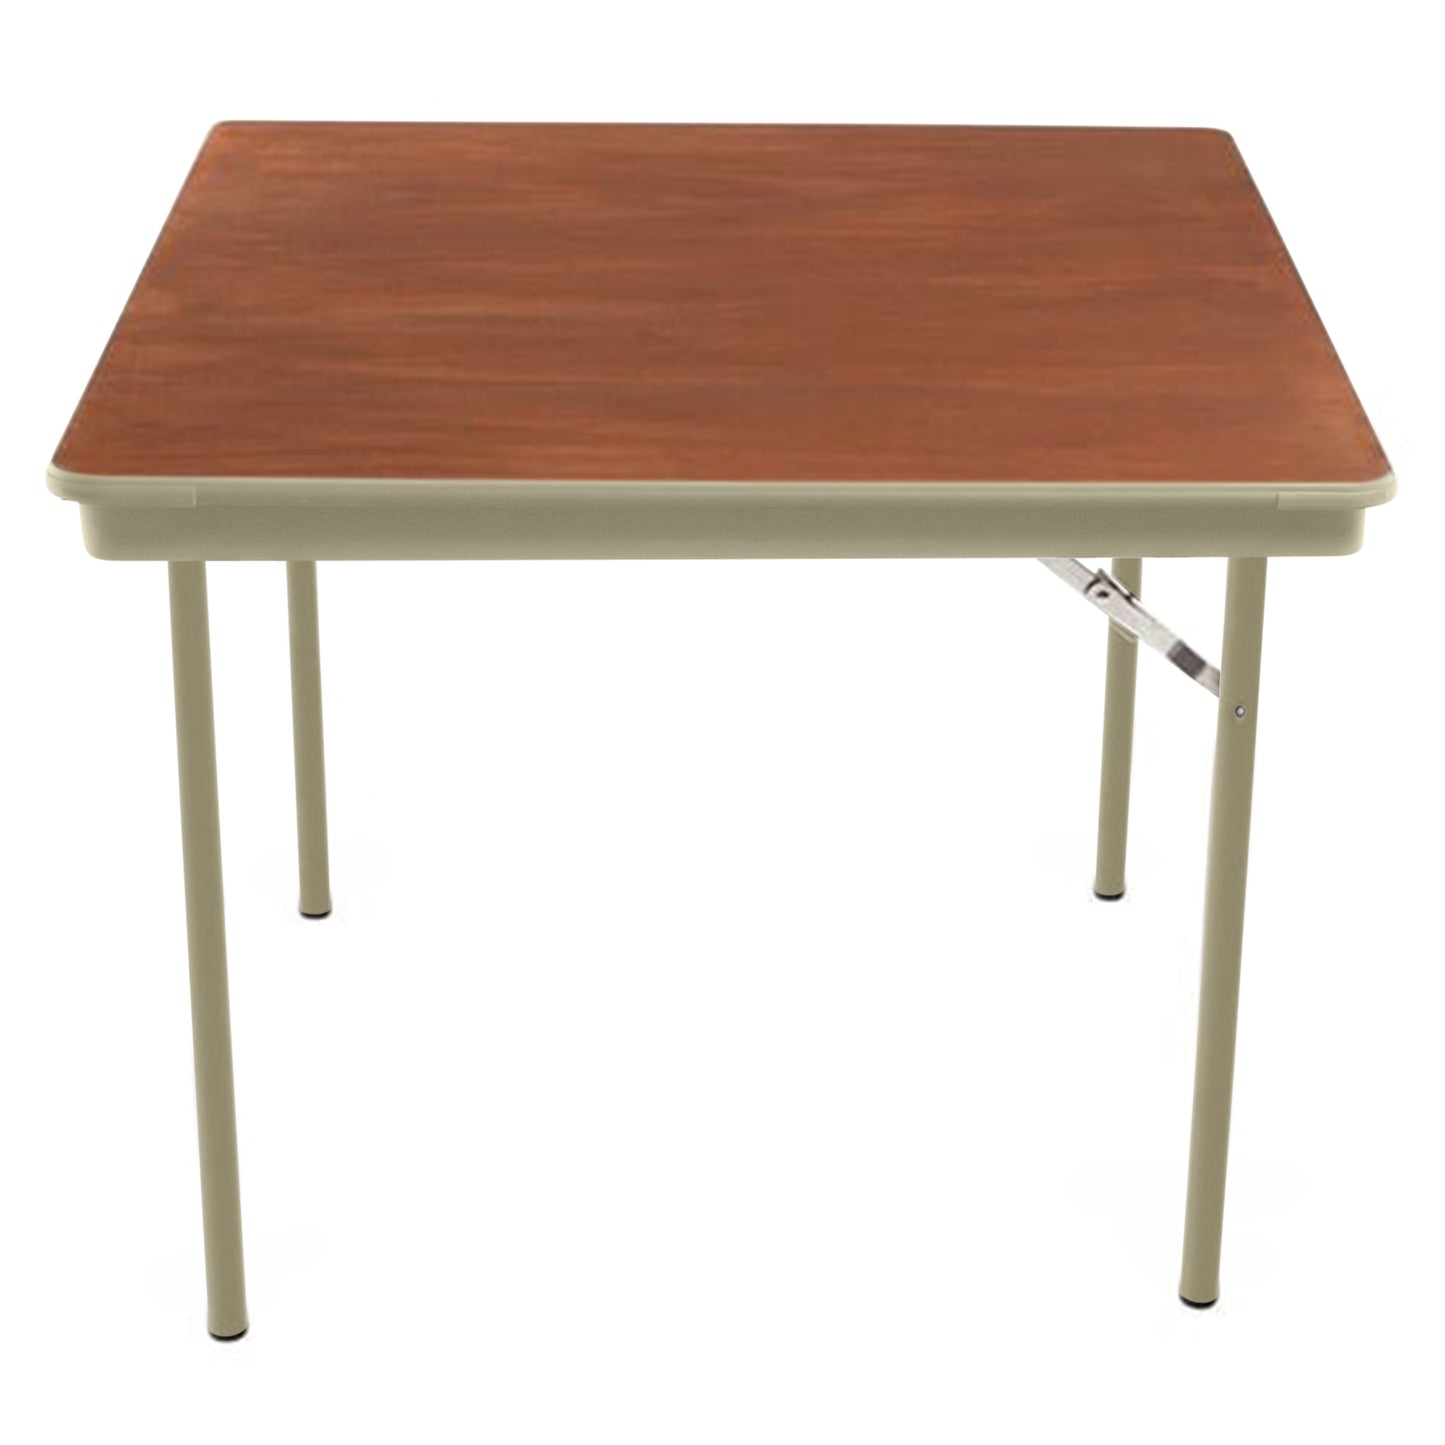 AmTab Folding Table - Plywood Stained and Sealed - Vinyl T-Molding Edge - Square - 30"W x 30"L x 29"H  (AmTab AMT-SQ30PM)